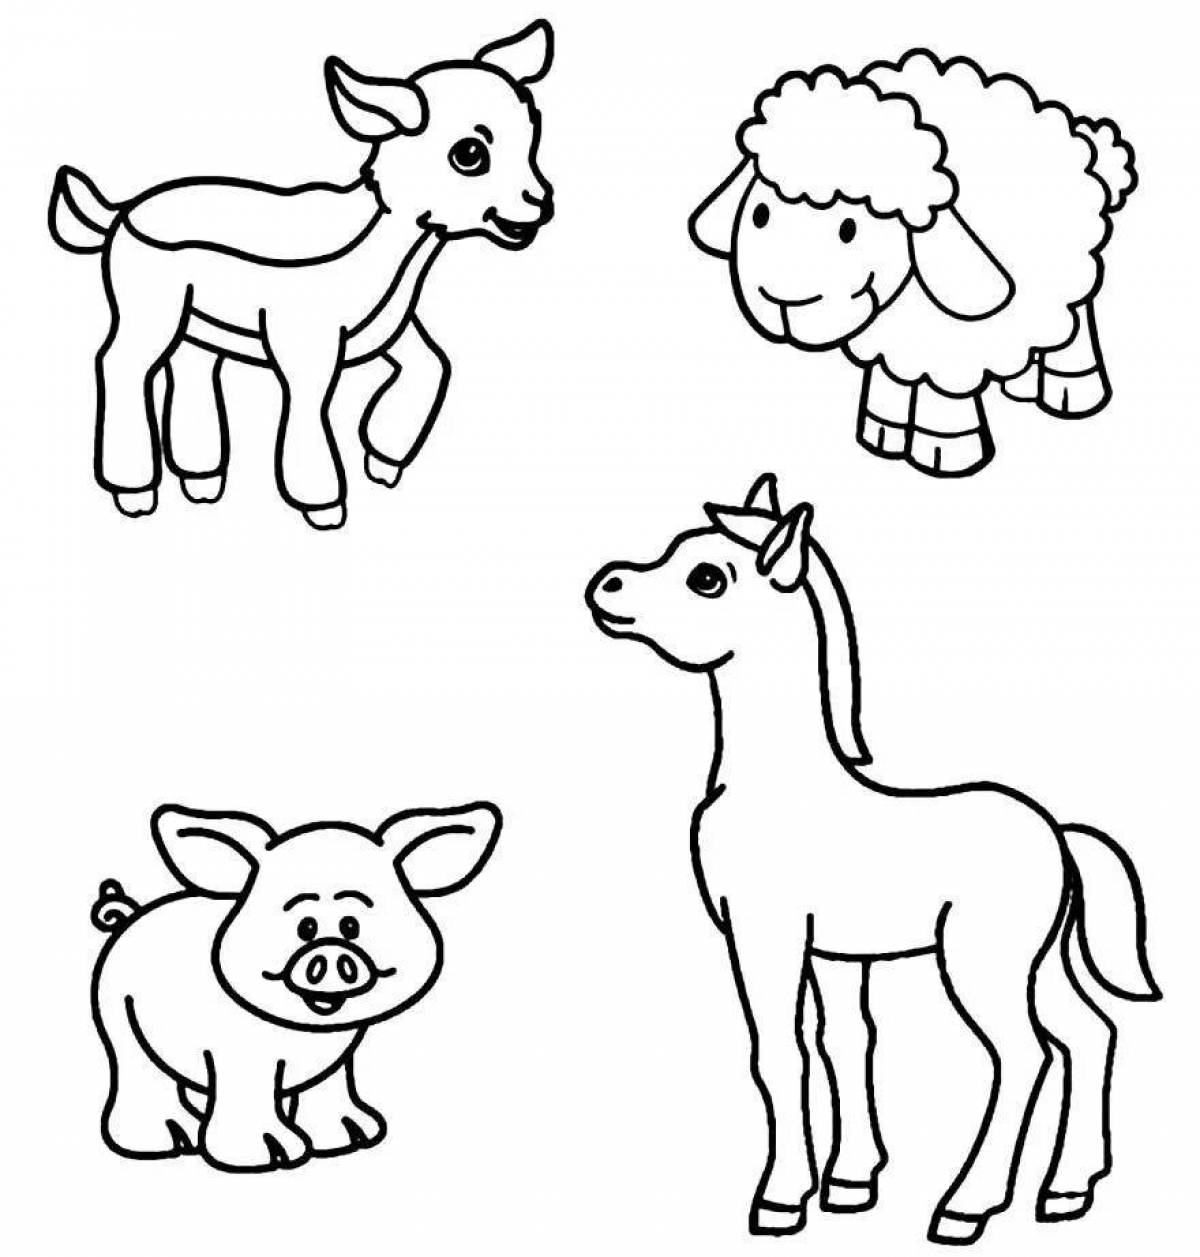 Fancy animal coloring pages for kids 3 4